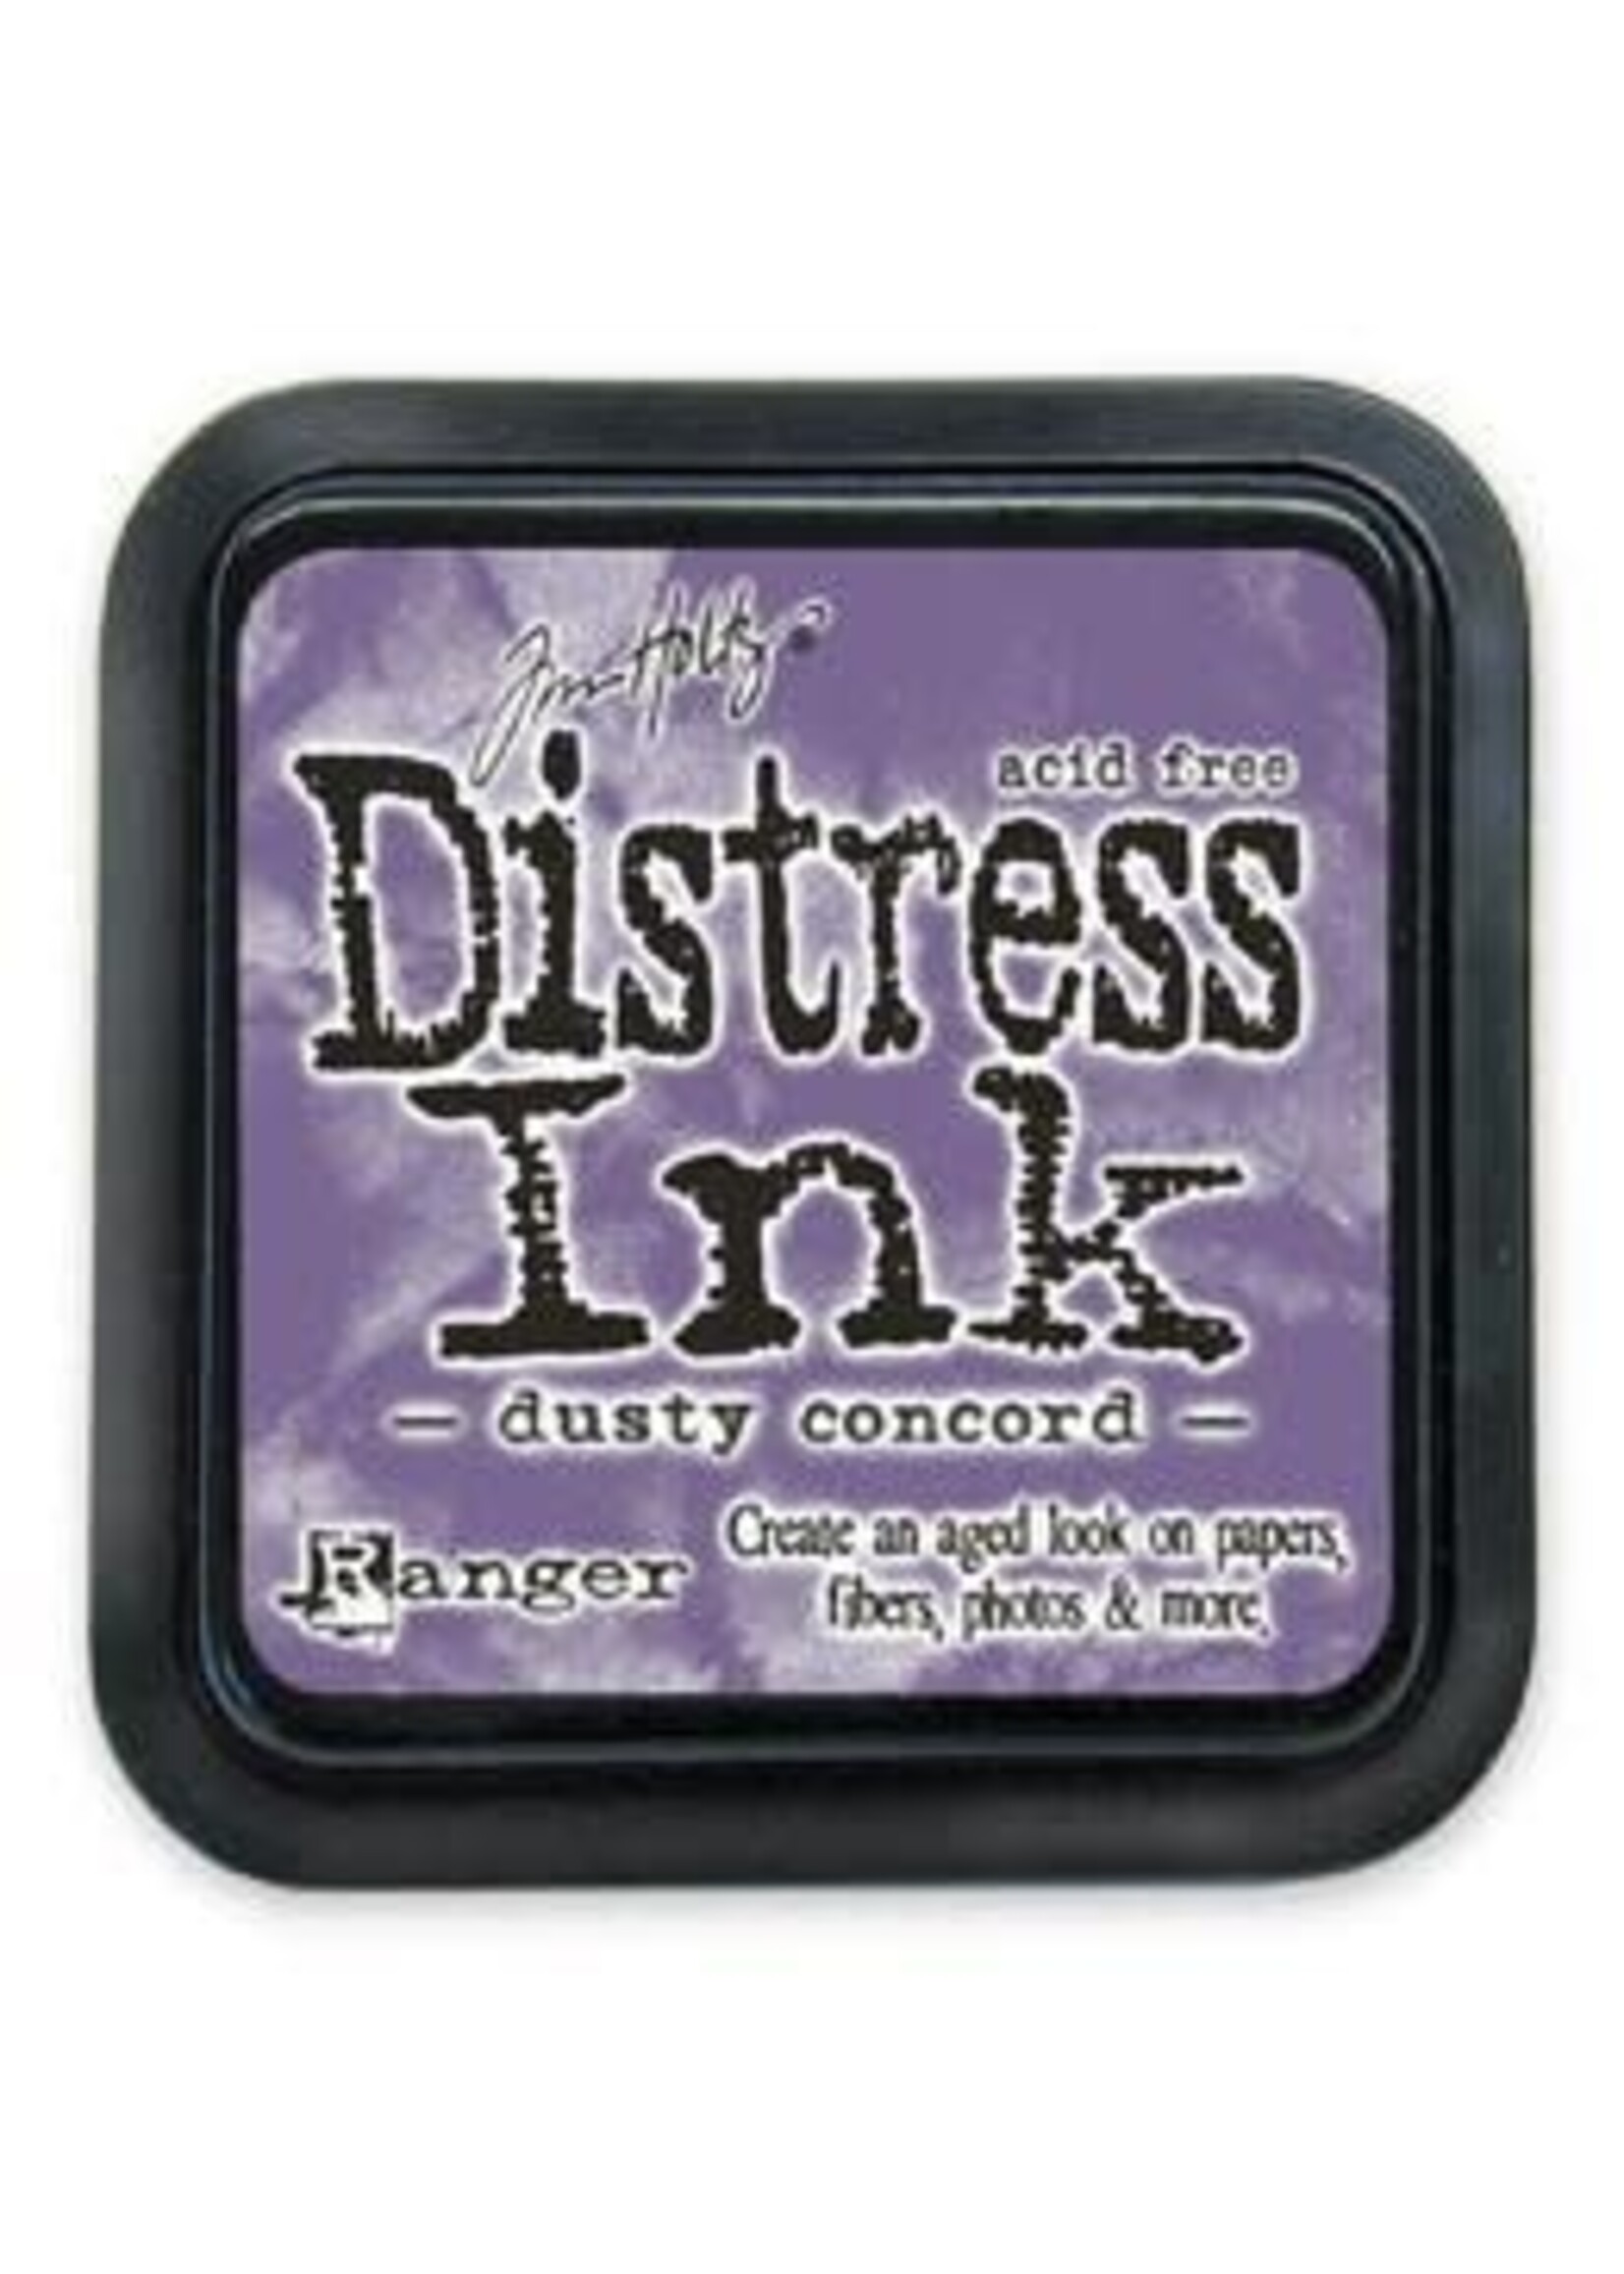 RANGER Distress Ink Dusty Concord